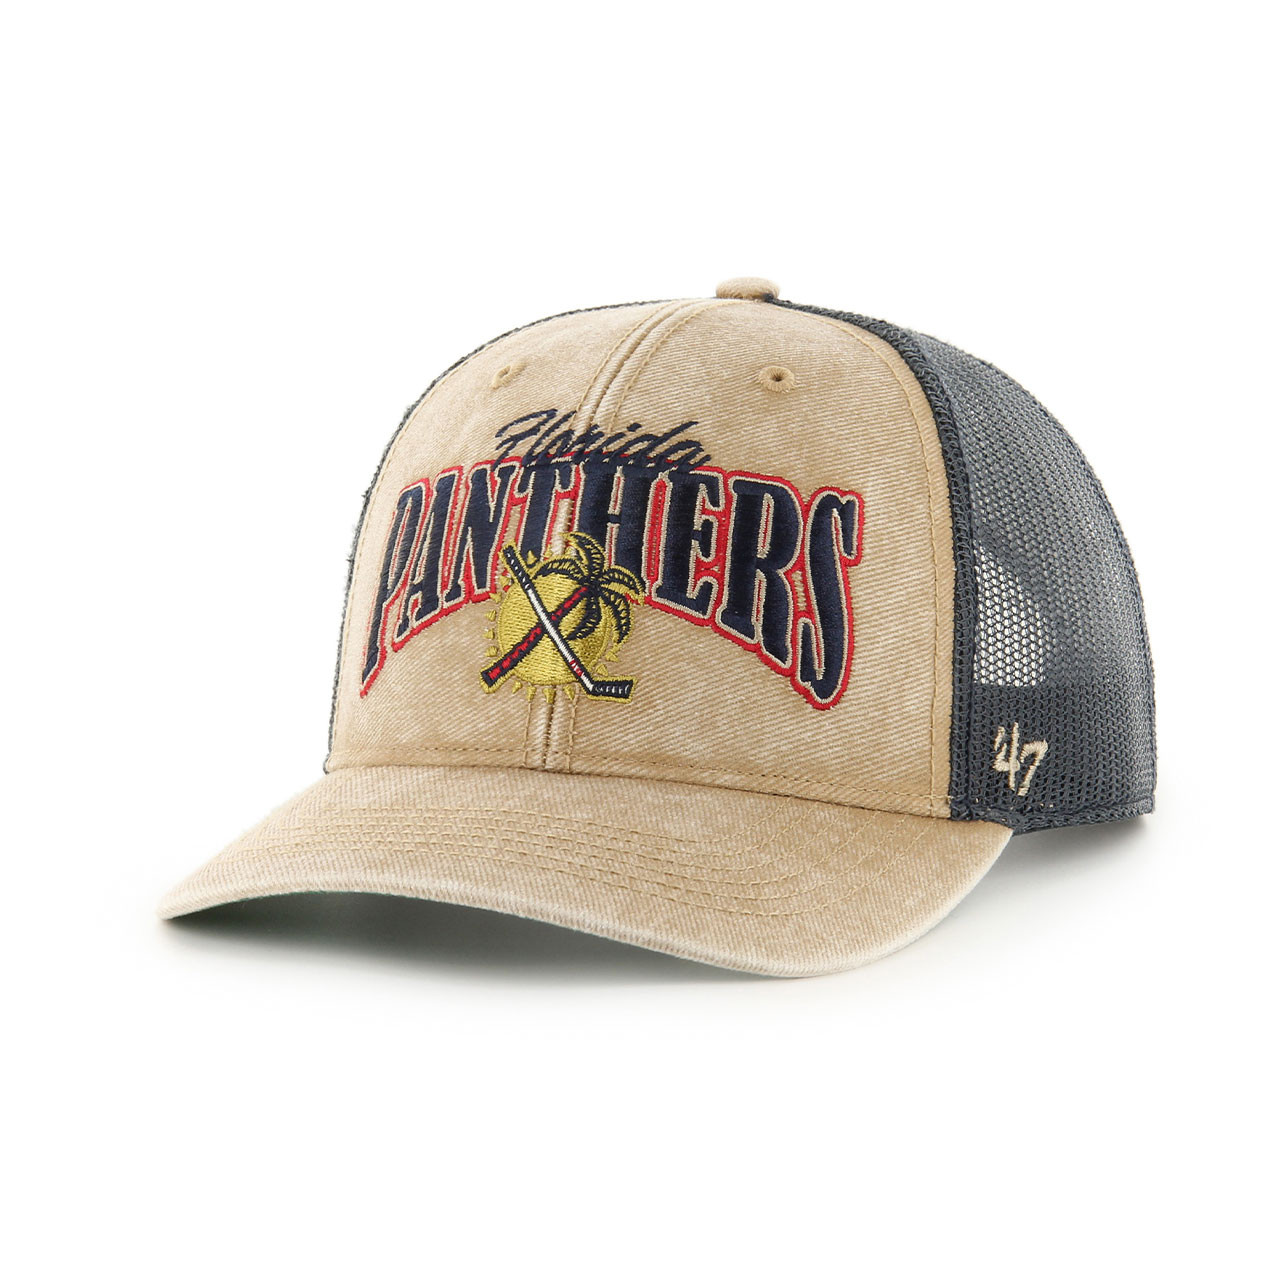 Florida Panthers on X: RT @FlaTeamShop: JUST DROPPED: new Stanley